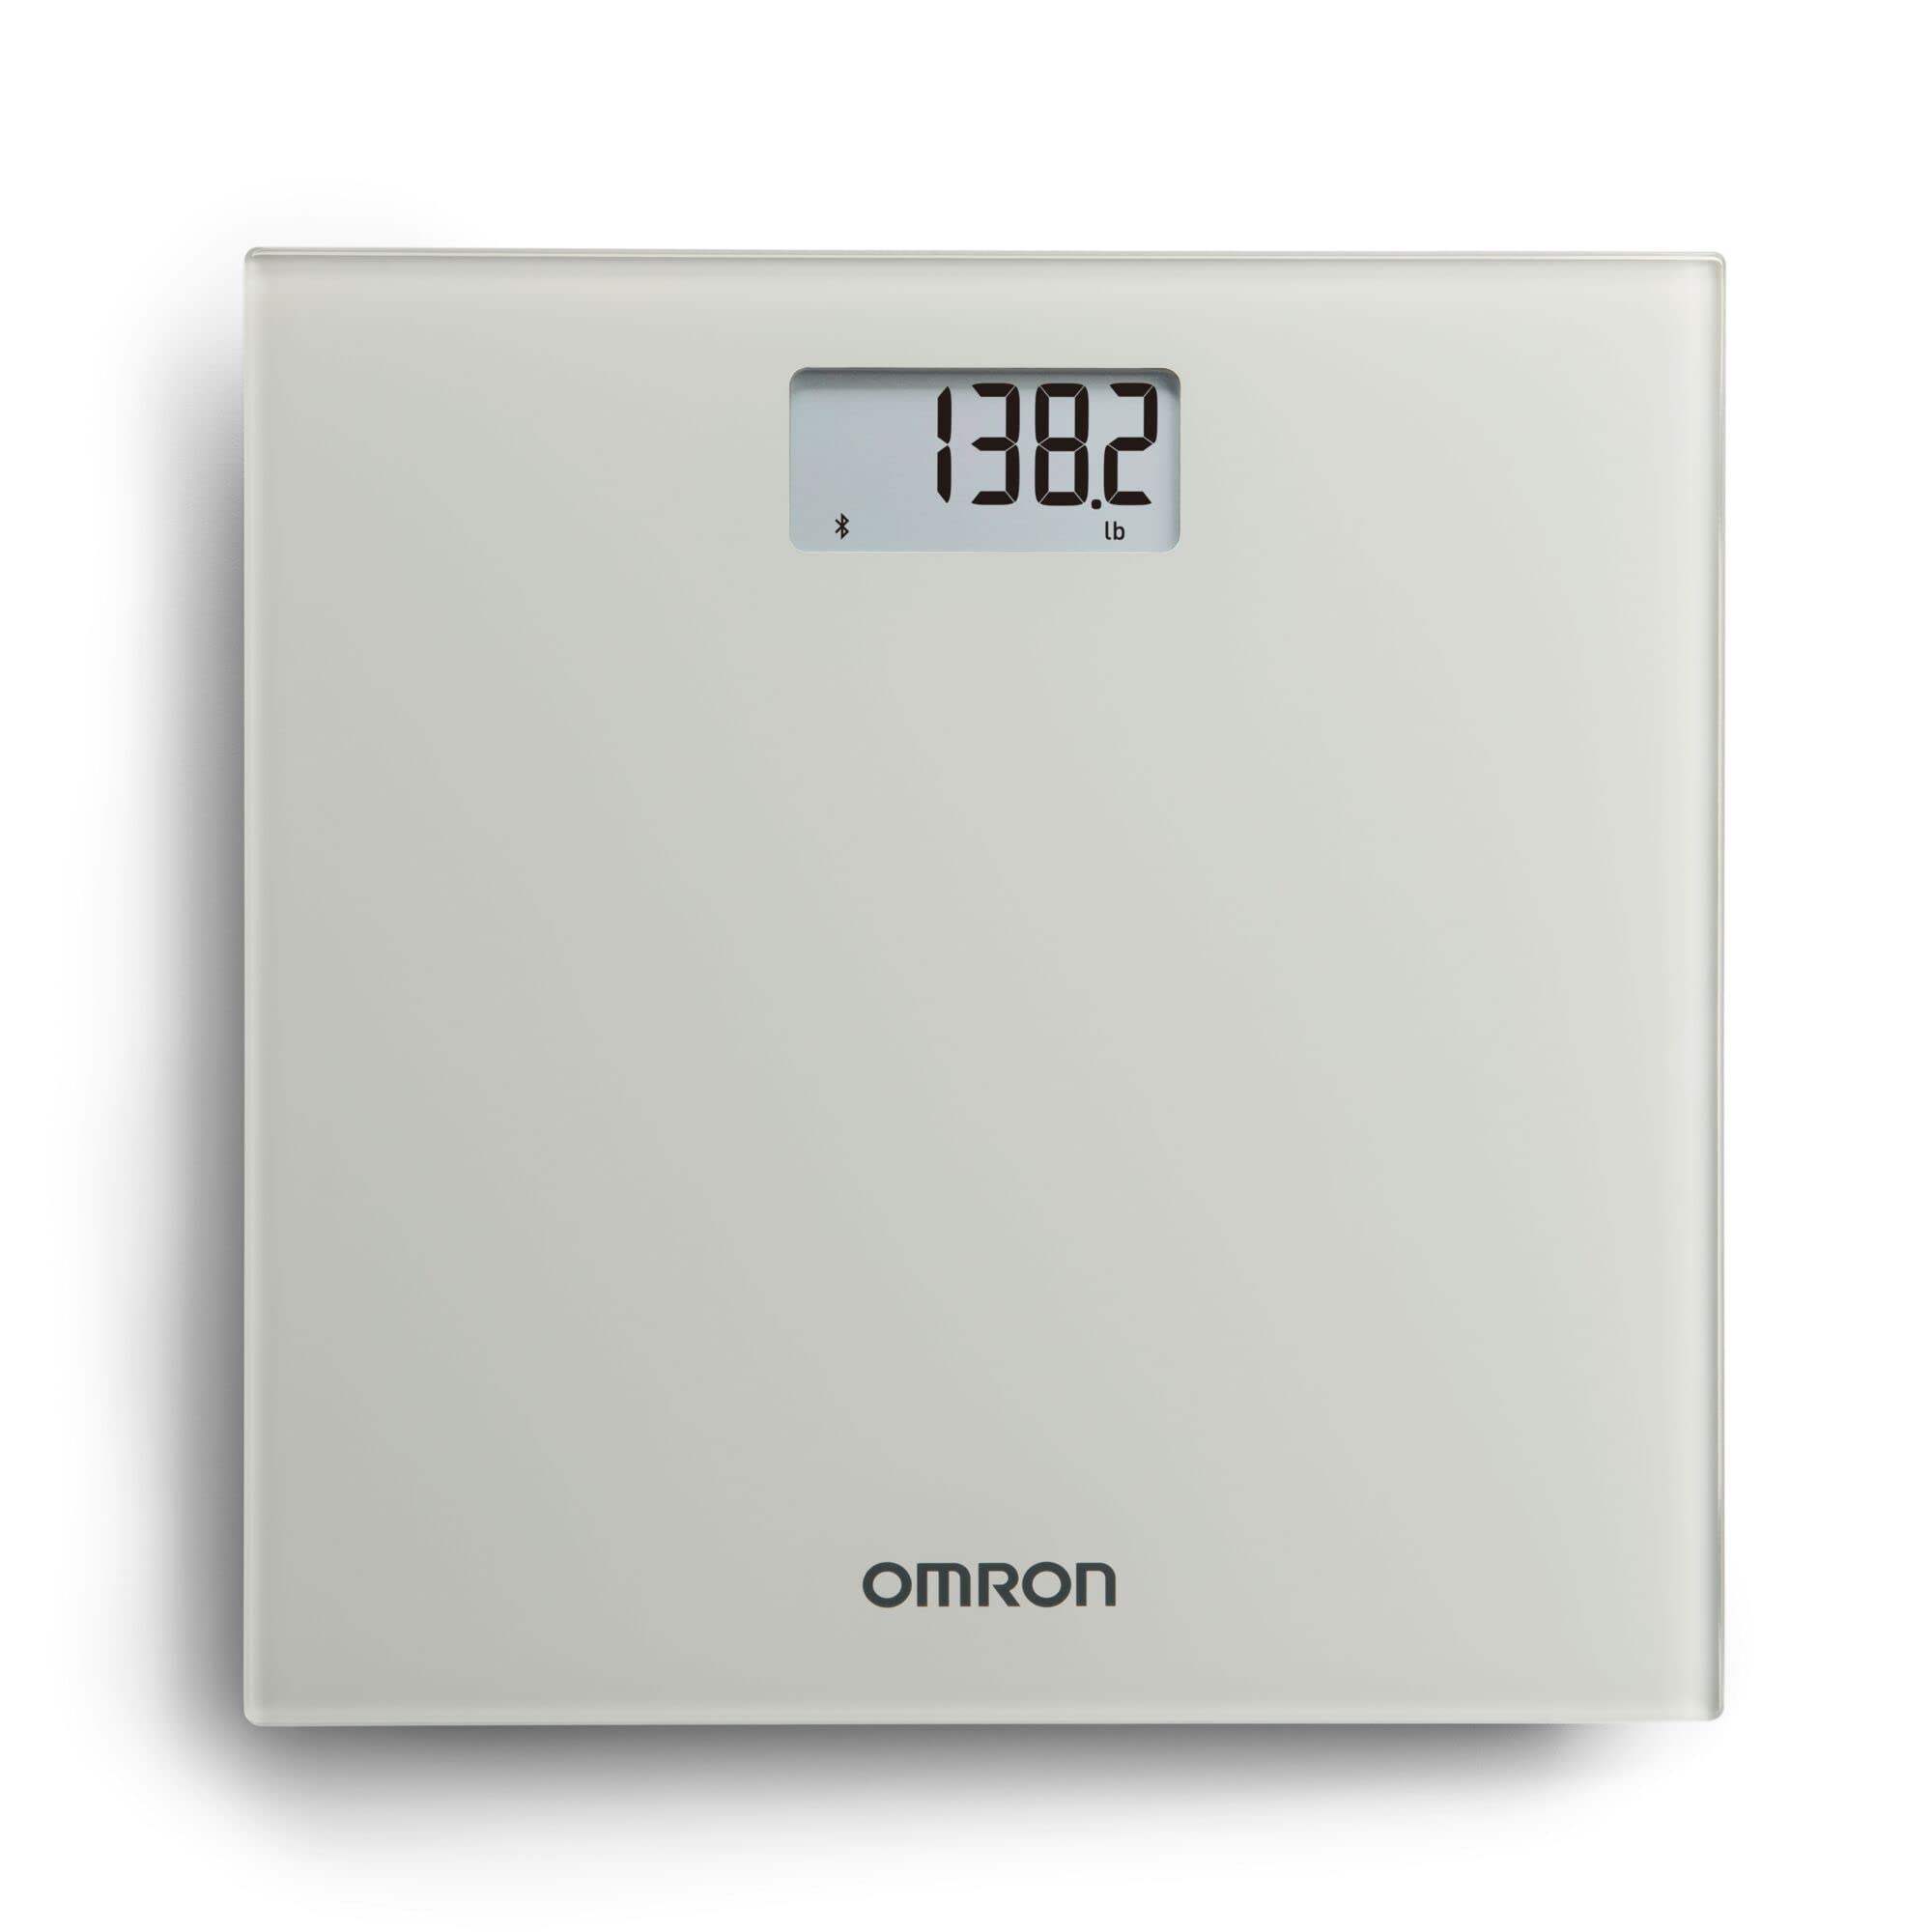 OMRON Digital Scale with Bluetooth Connectivity (SC -150), 330-lb Weight Capacity, with Free Smartphone App, Light Grey